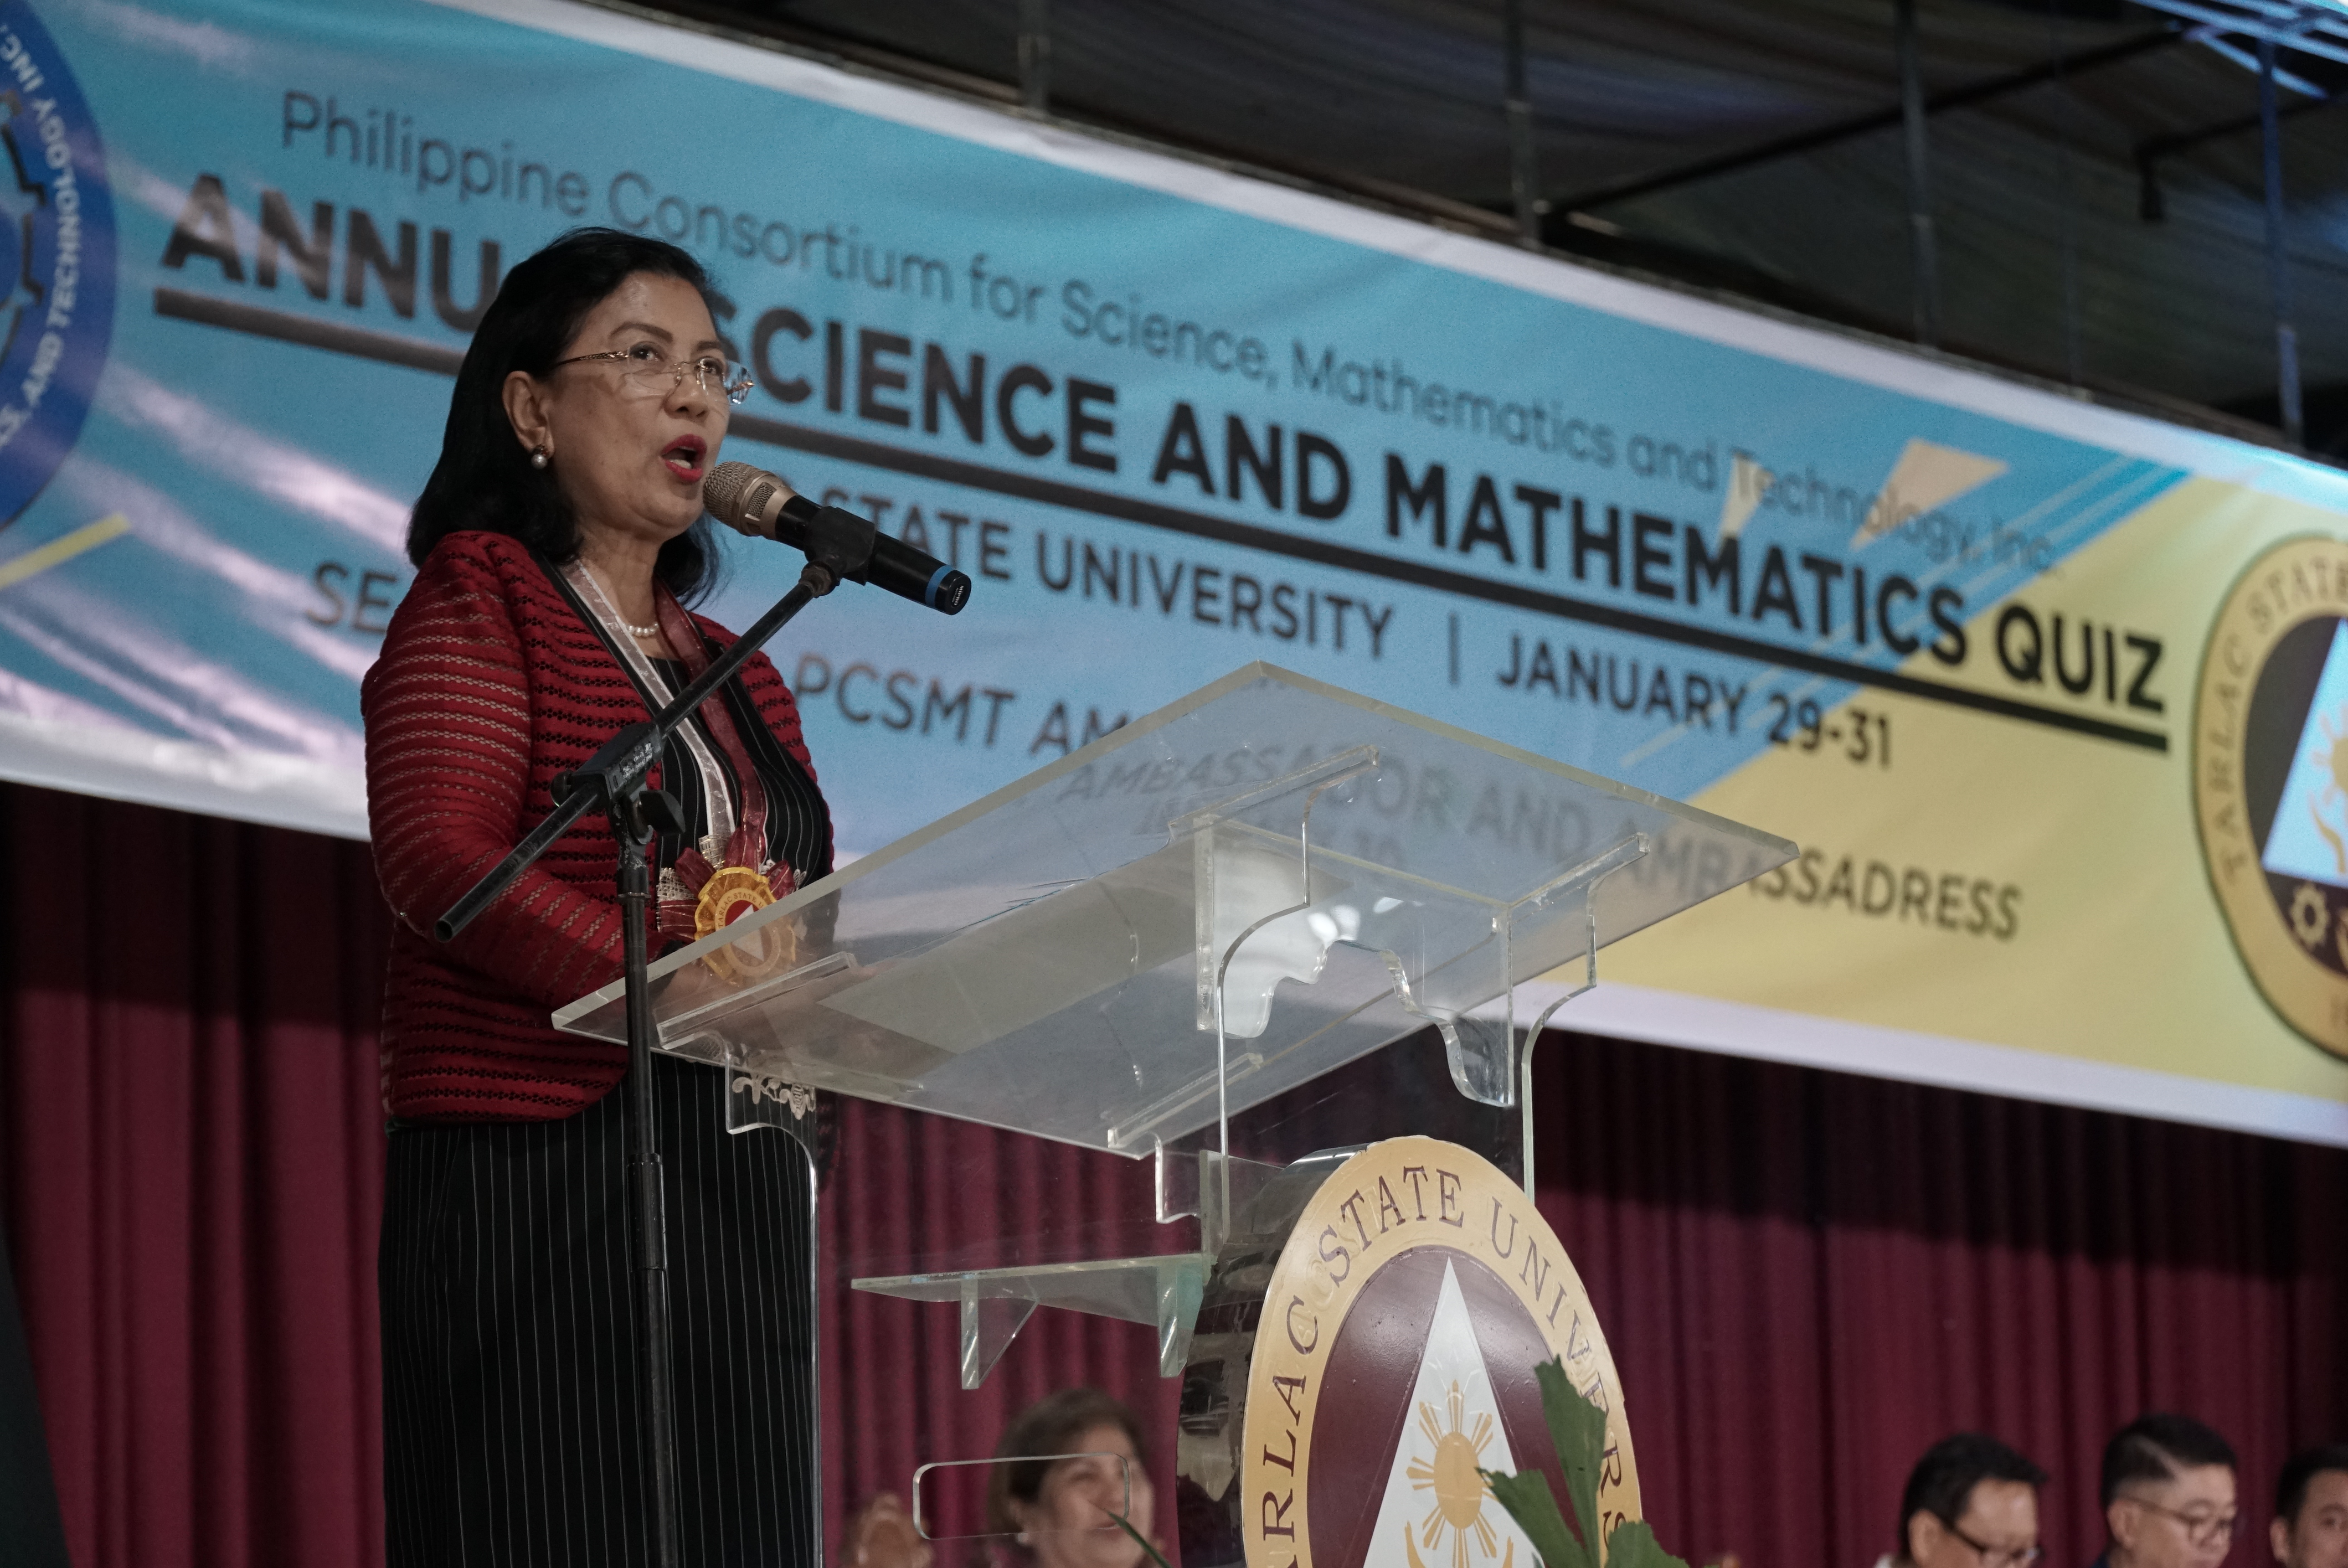 PCSMT Annual Science and Mathematics Quiz 2020